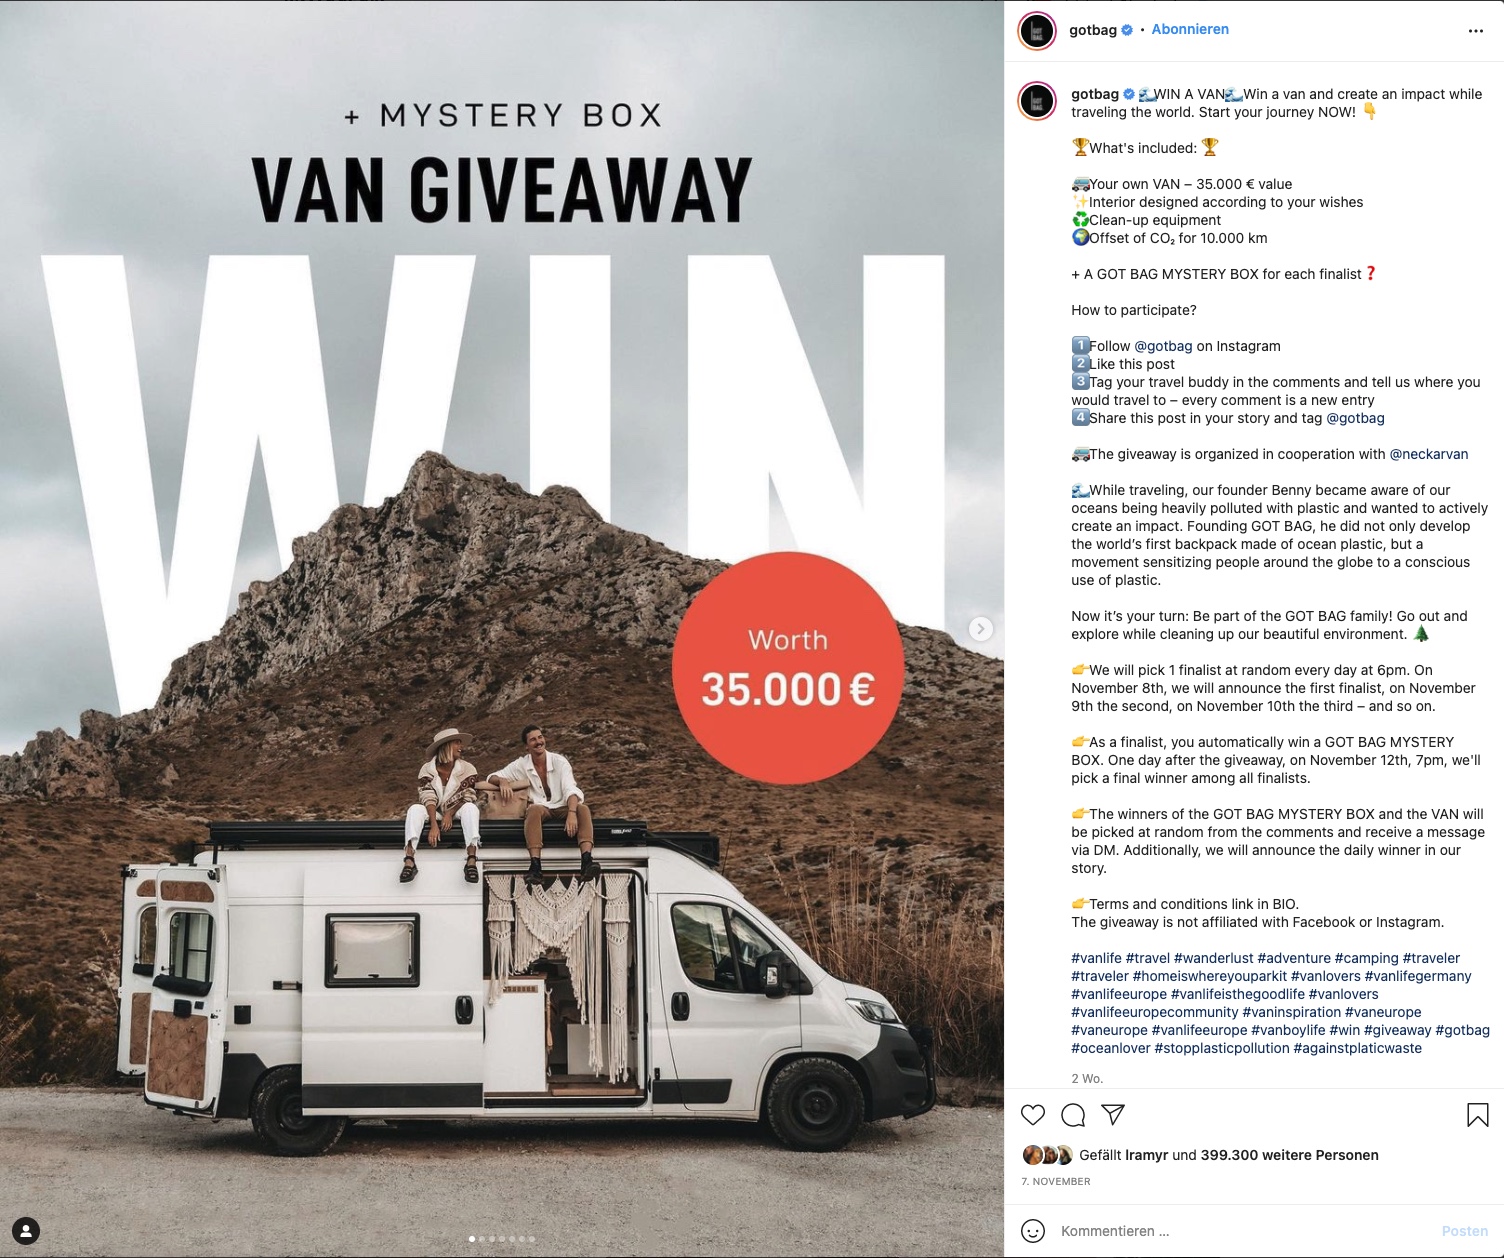 The image shows the viral Instagram sweepstakes campaign of Got Bag